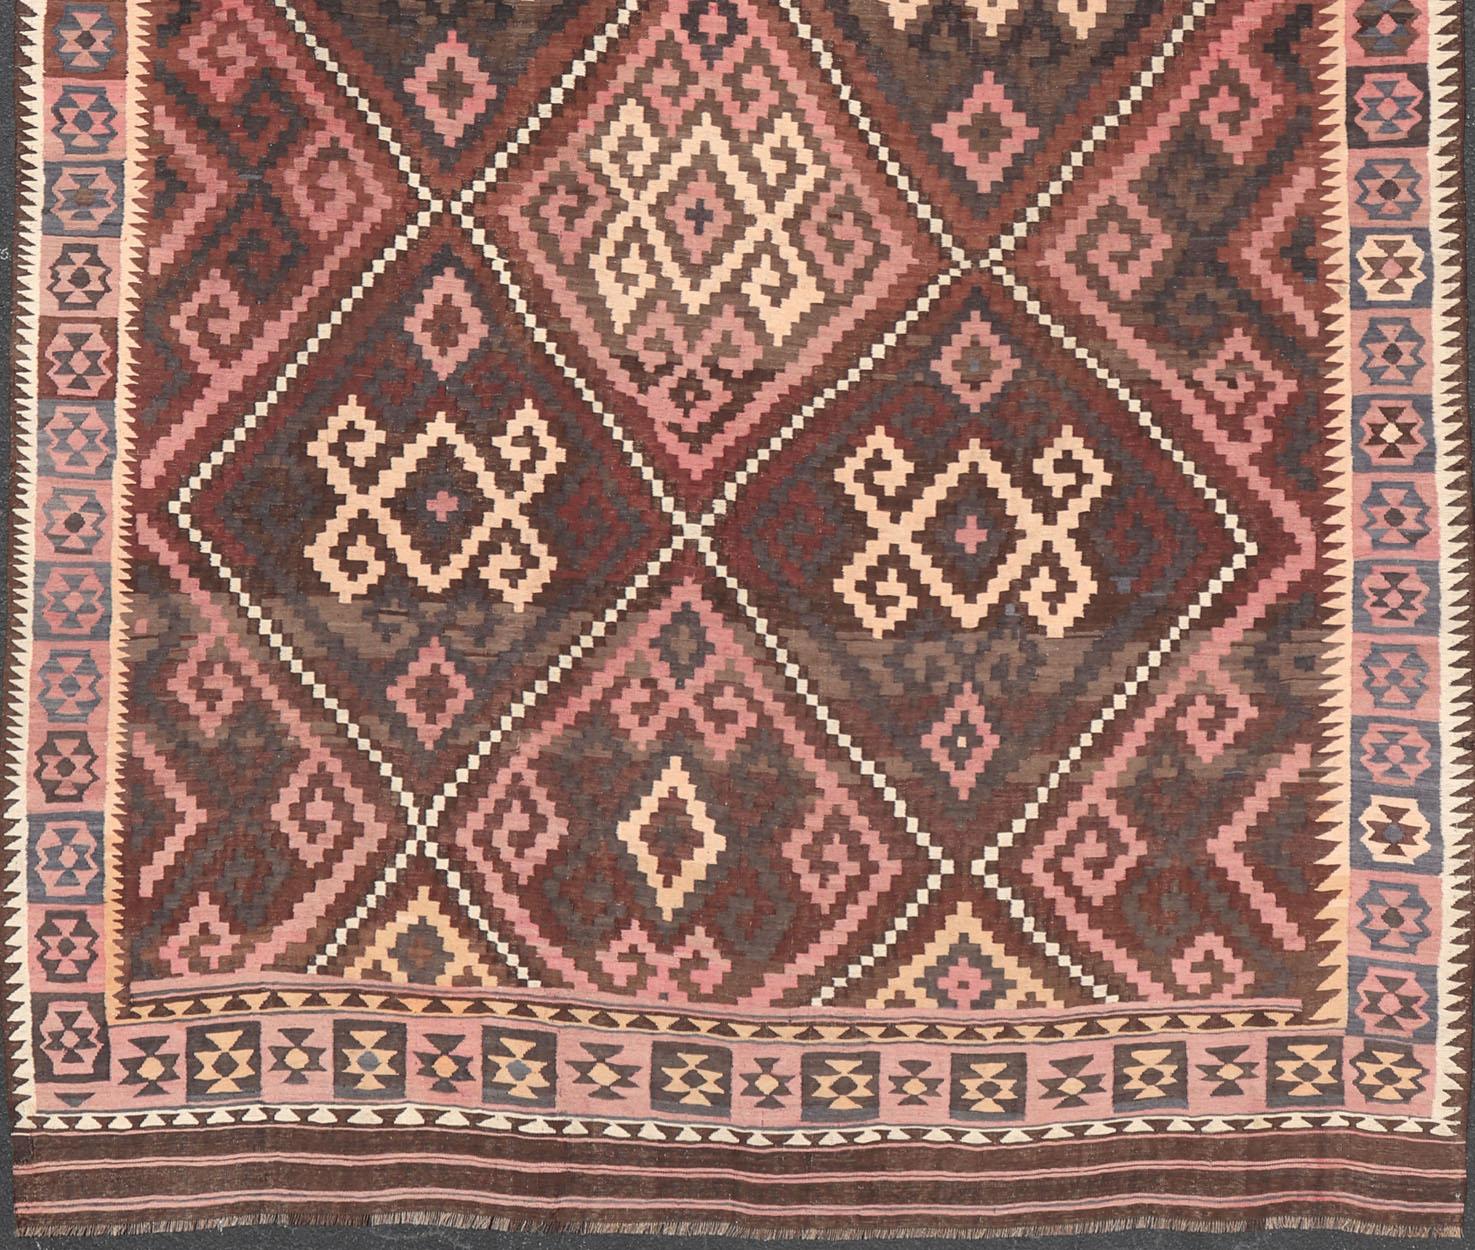 Afghan All-Over Hand Woven Geometric Kilim Diamond Design in Brown, Pink, and Ivory For Sale